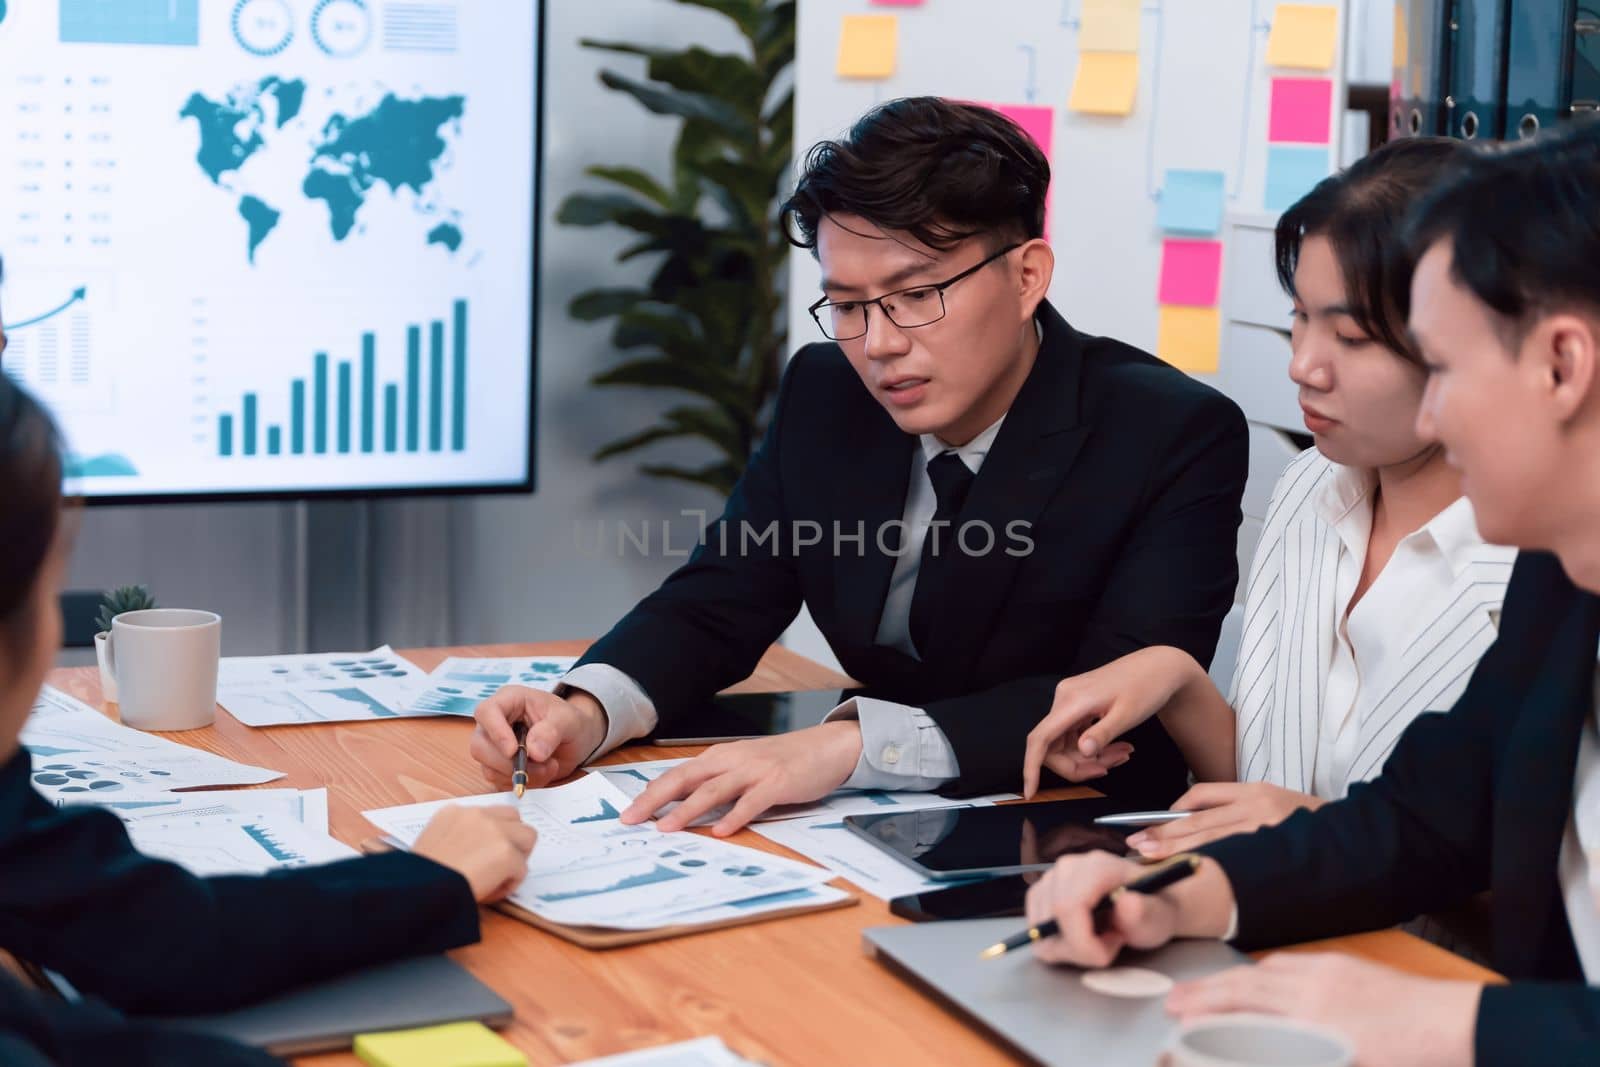 Business team of financial data analysis meeting with business intelligence, report paper and dashboard on laptop for marketing strategy. Business people working together to promote harmony in office.